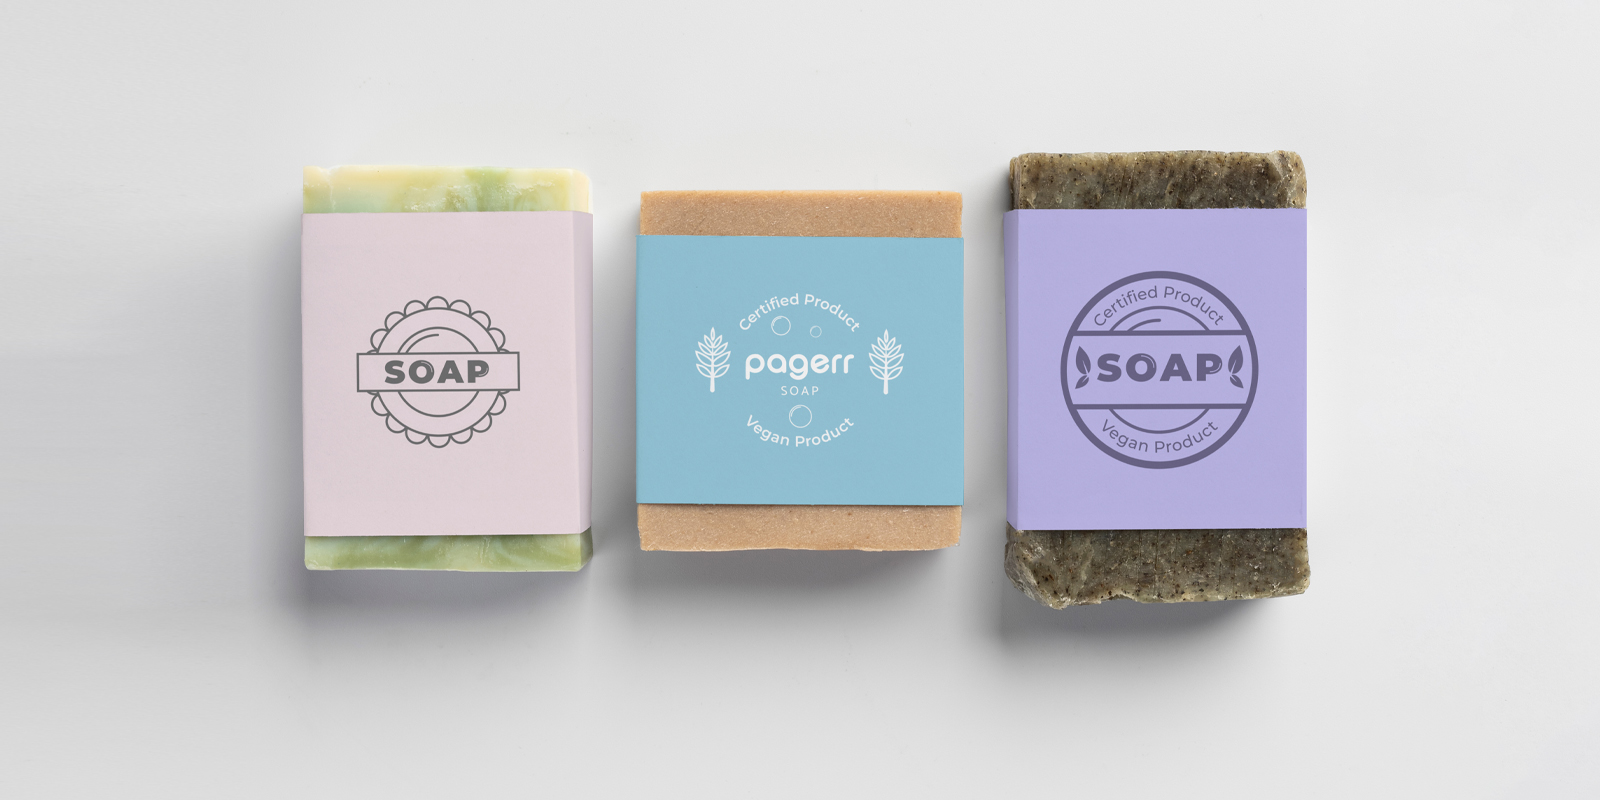 Soap labels in Berlin - Print with Pagerr